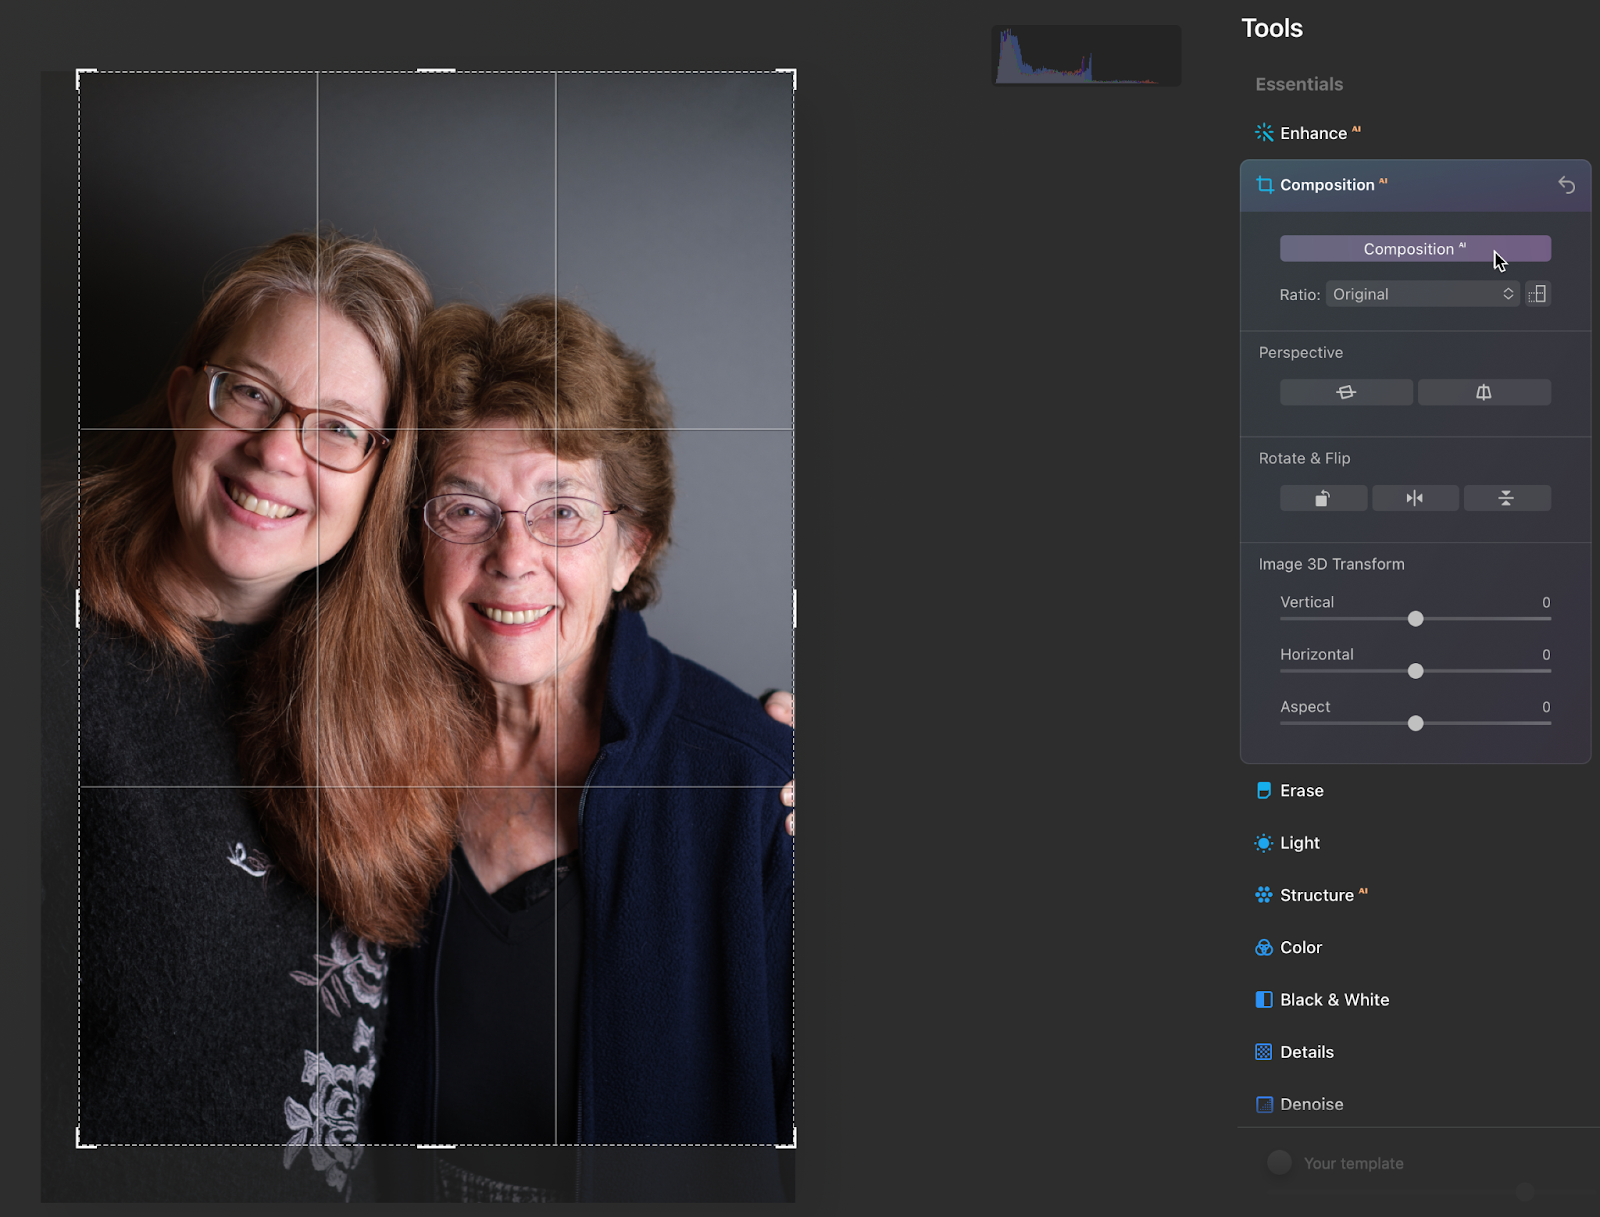 Luminar AI looks as if it emphasized each face along the rule-of-thirds guides, but kept the distracting fingers at right.